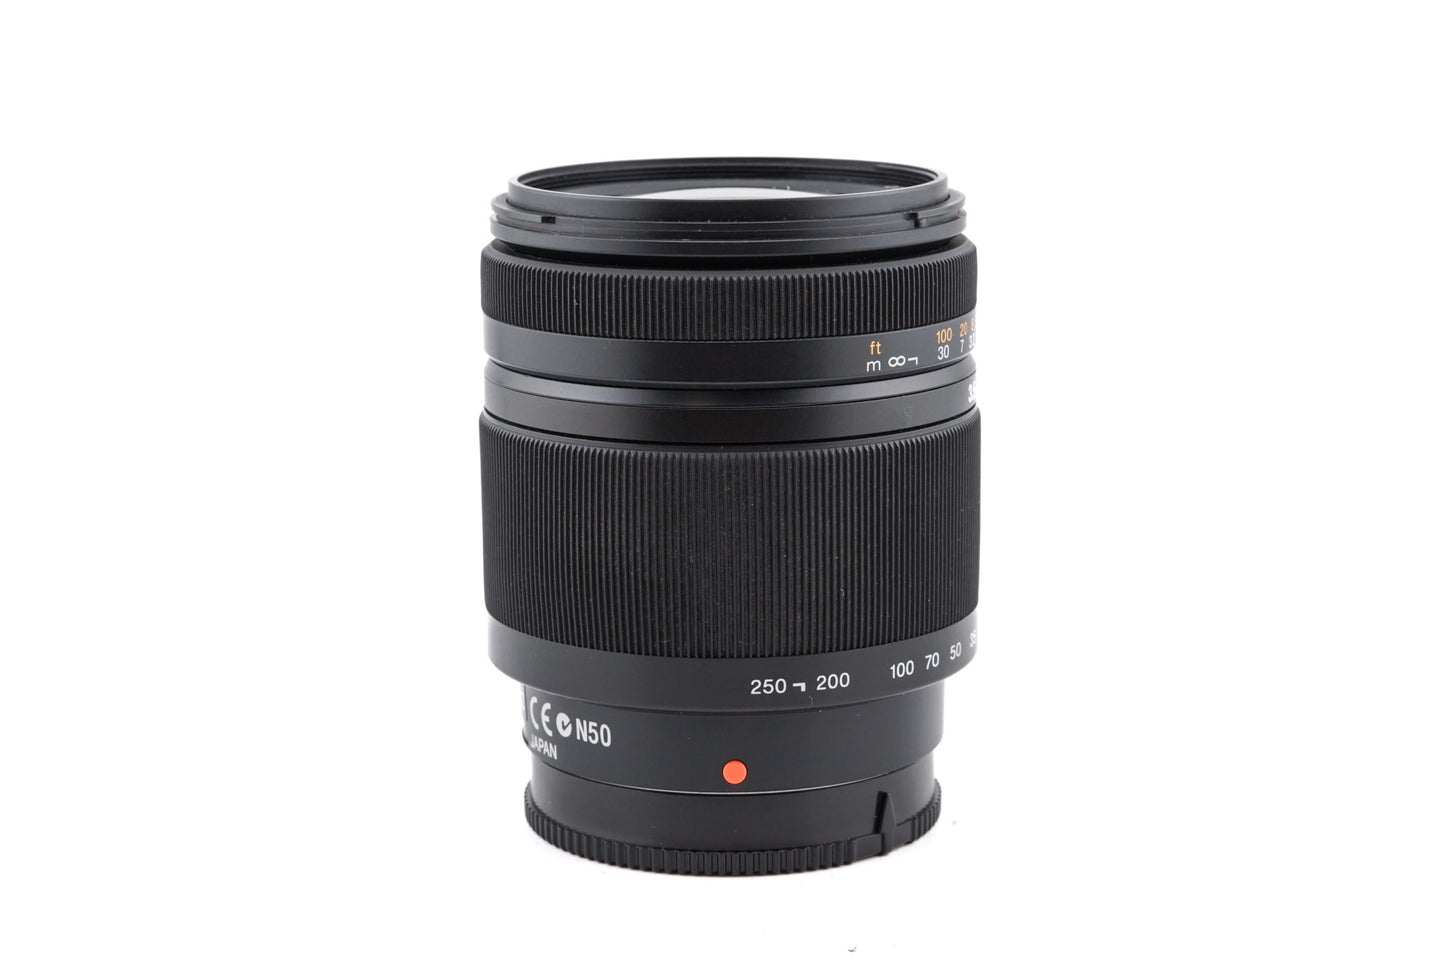 Sony 18-250mm f3.5-6.3 DT